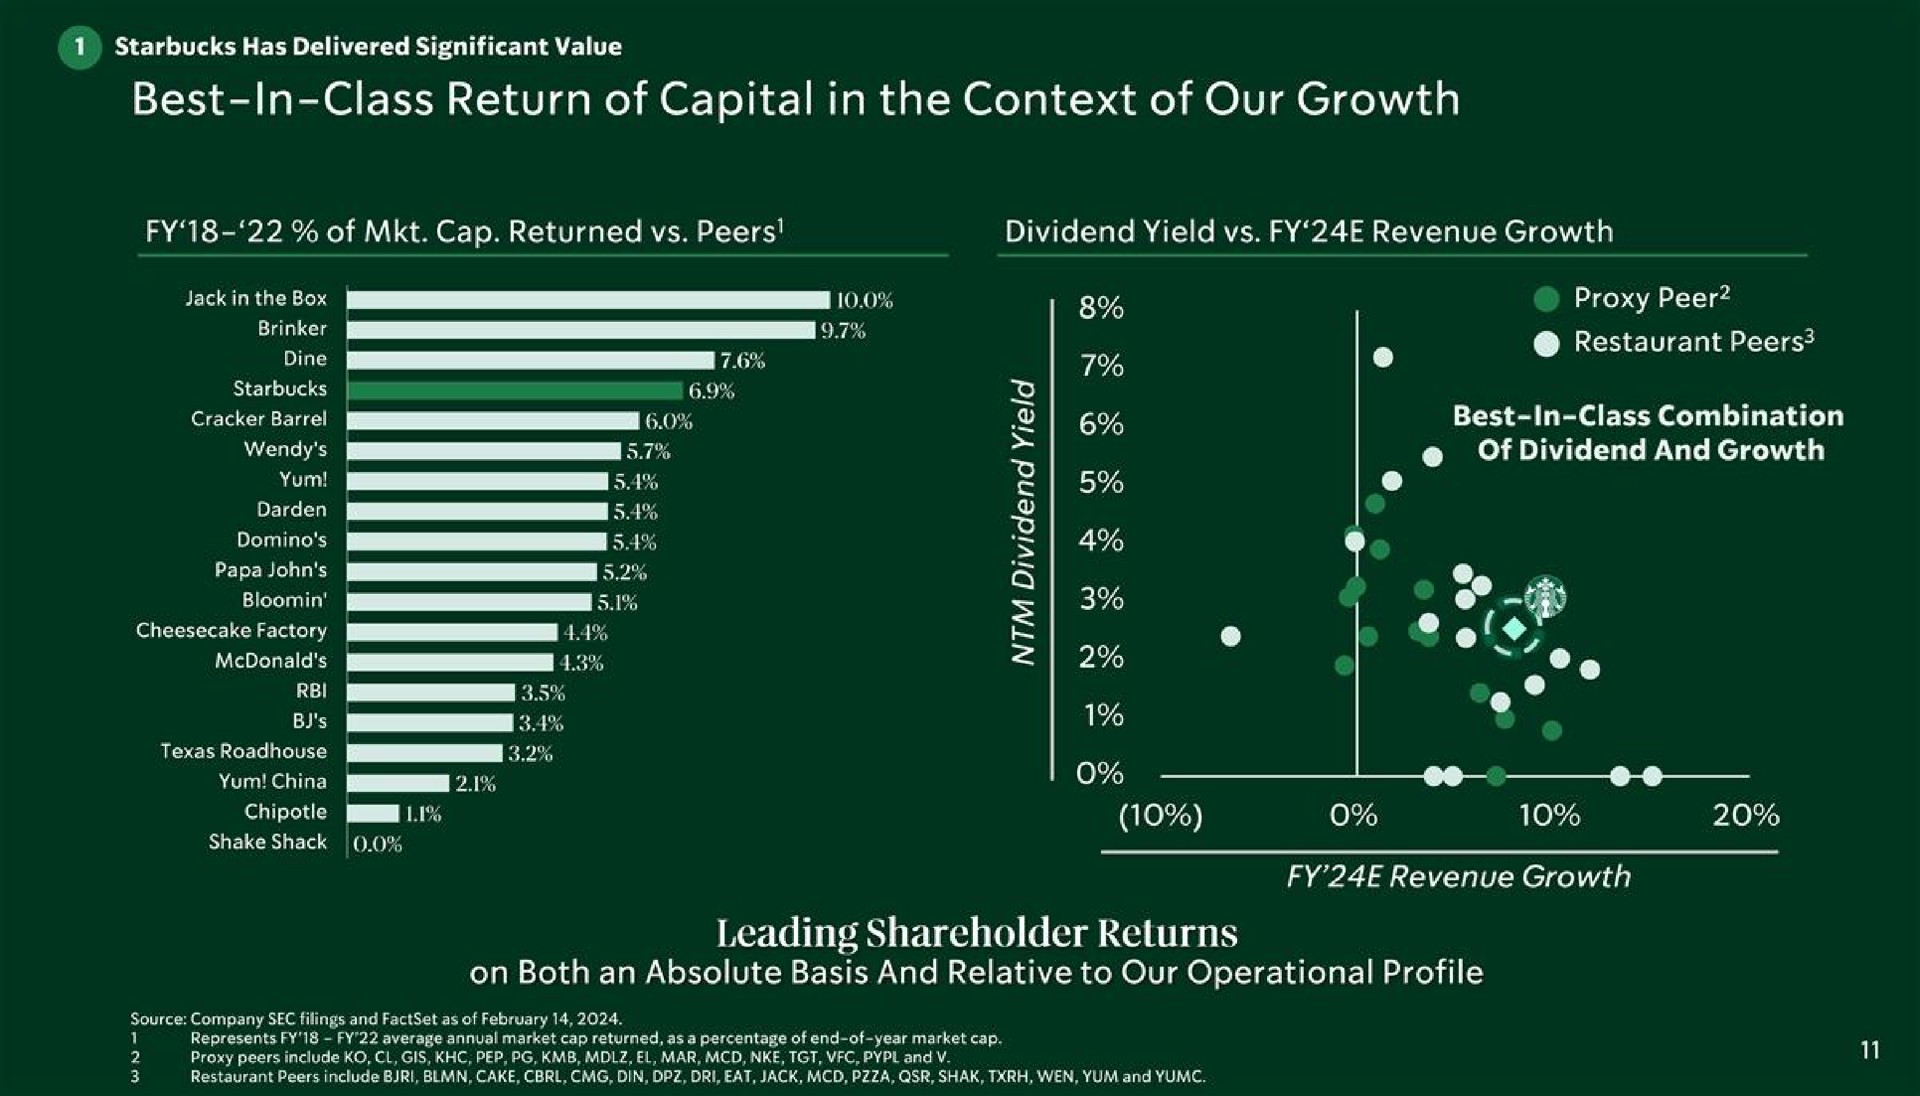 best in class return of capital in the context of our growth a i pats a ers a leading shareholder returns | Starbucks